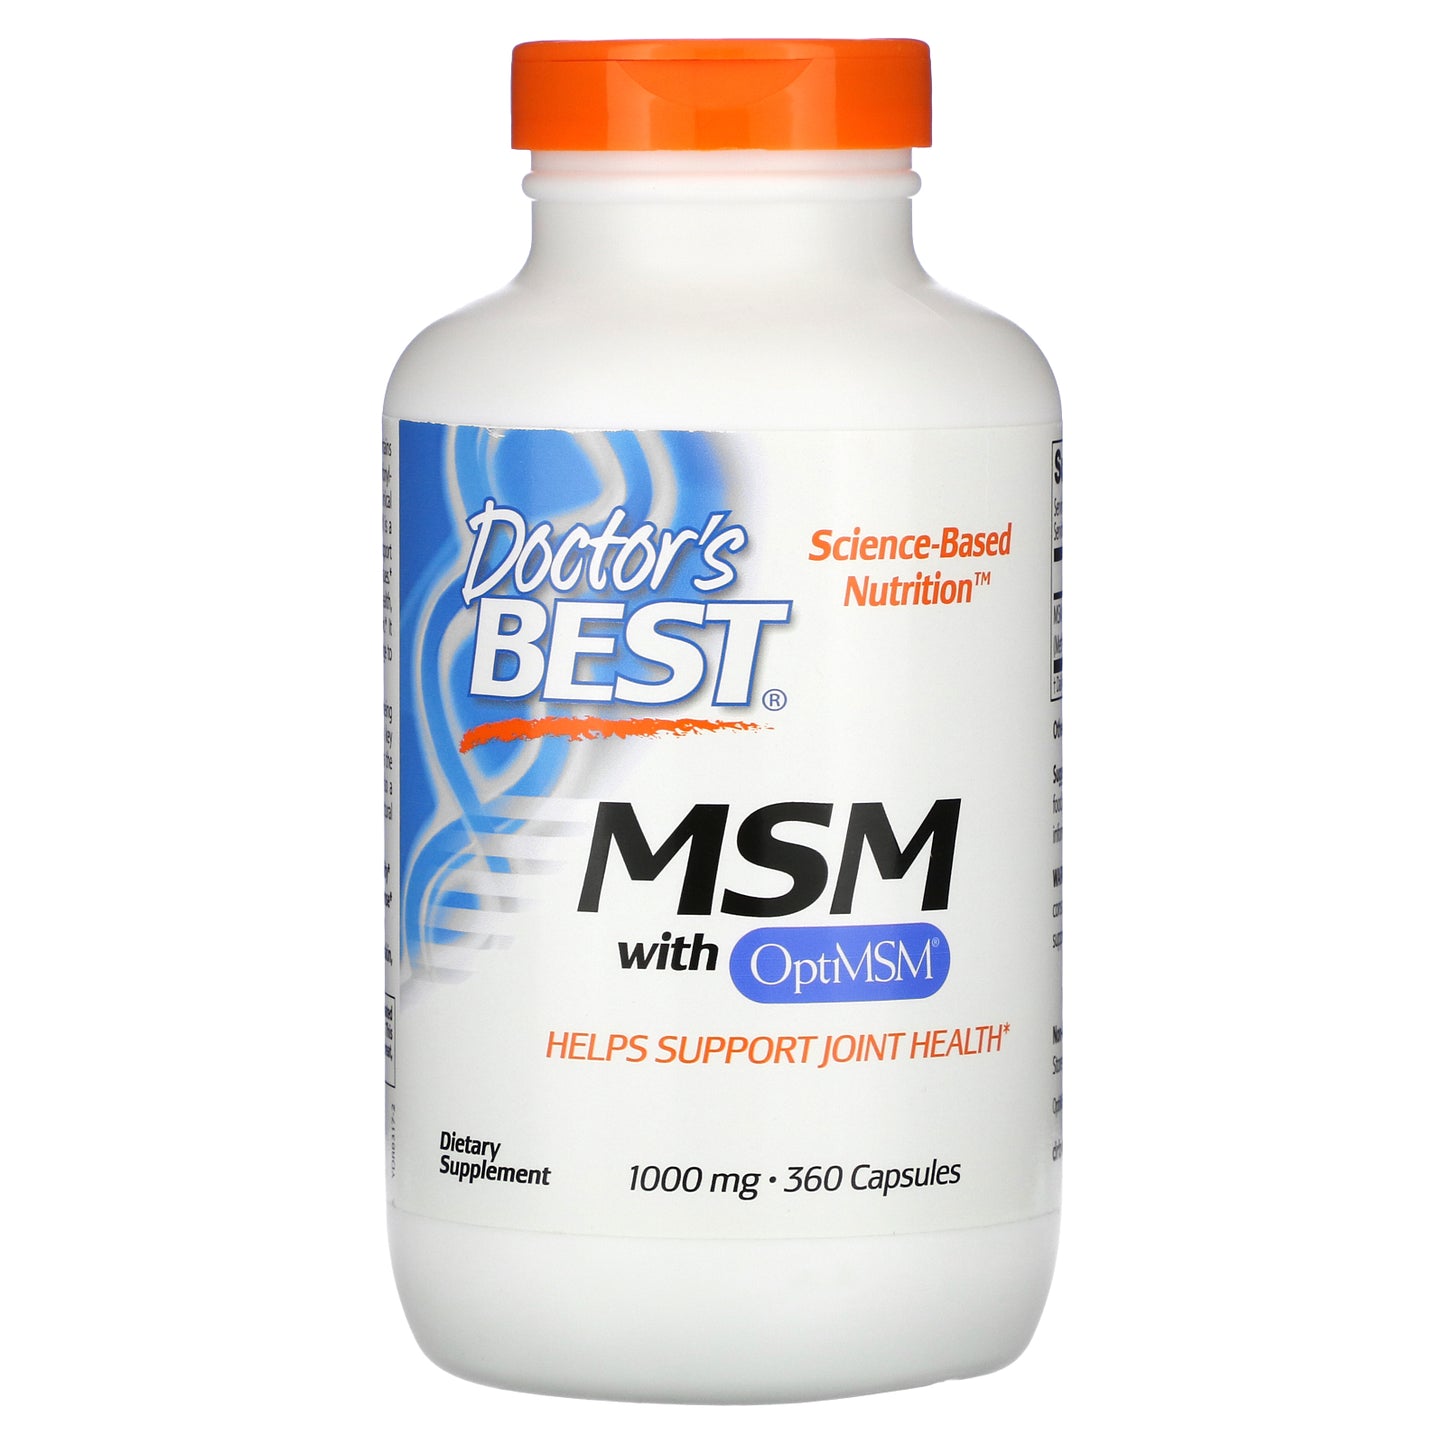 Doctor's Best MSM with OptiMSM, 1,000 mg, 360 Capsules